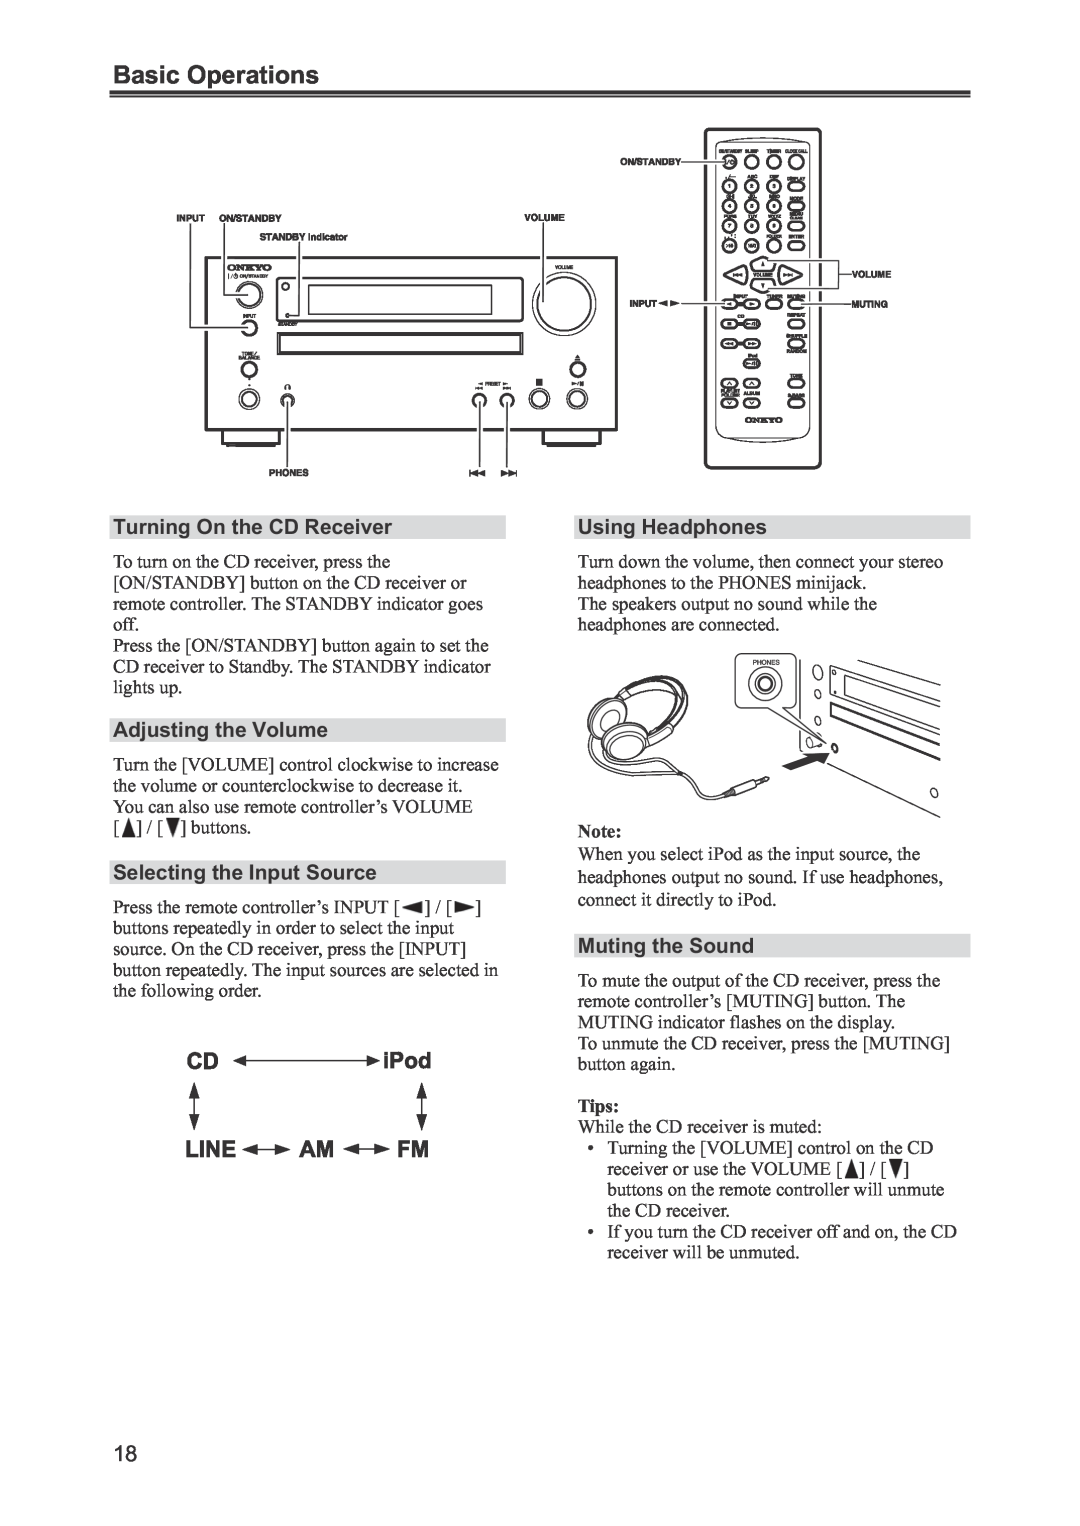 Onkyo CR-445 Basic Operations, Turning On the CD Receiver, Adjusting the Volume, Selecting the Input Source, Tips 